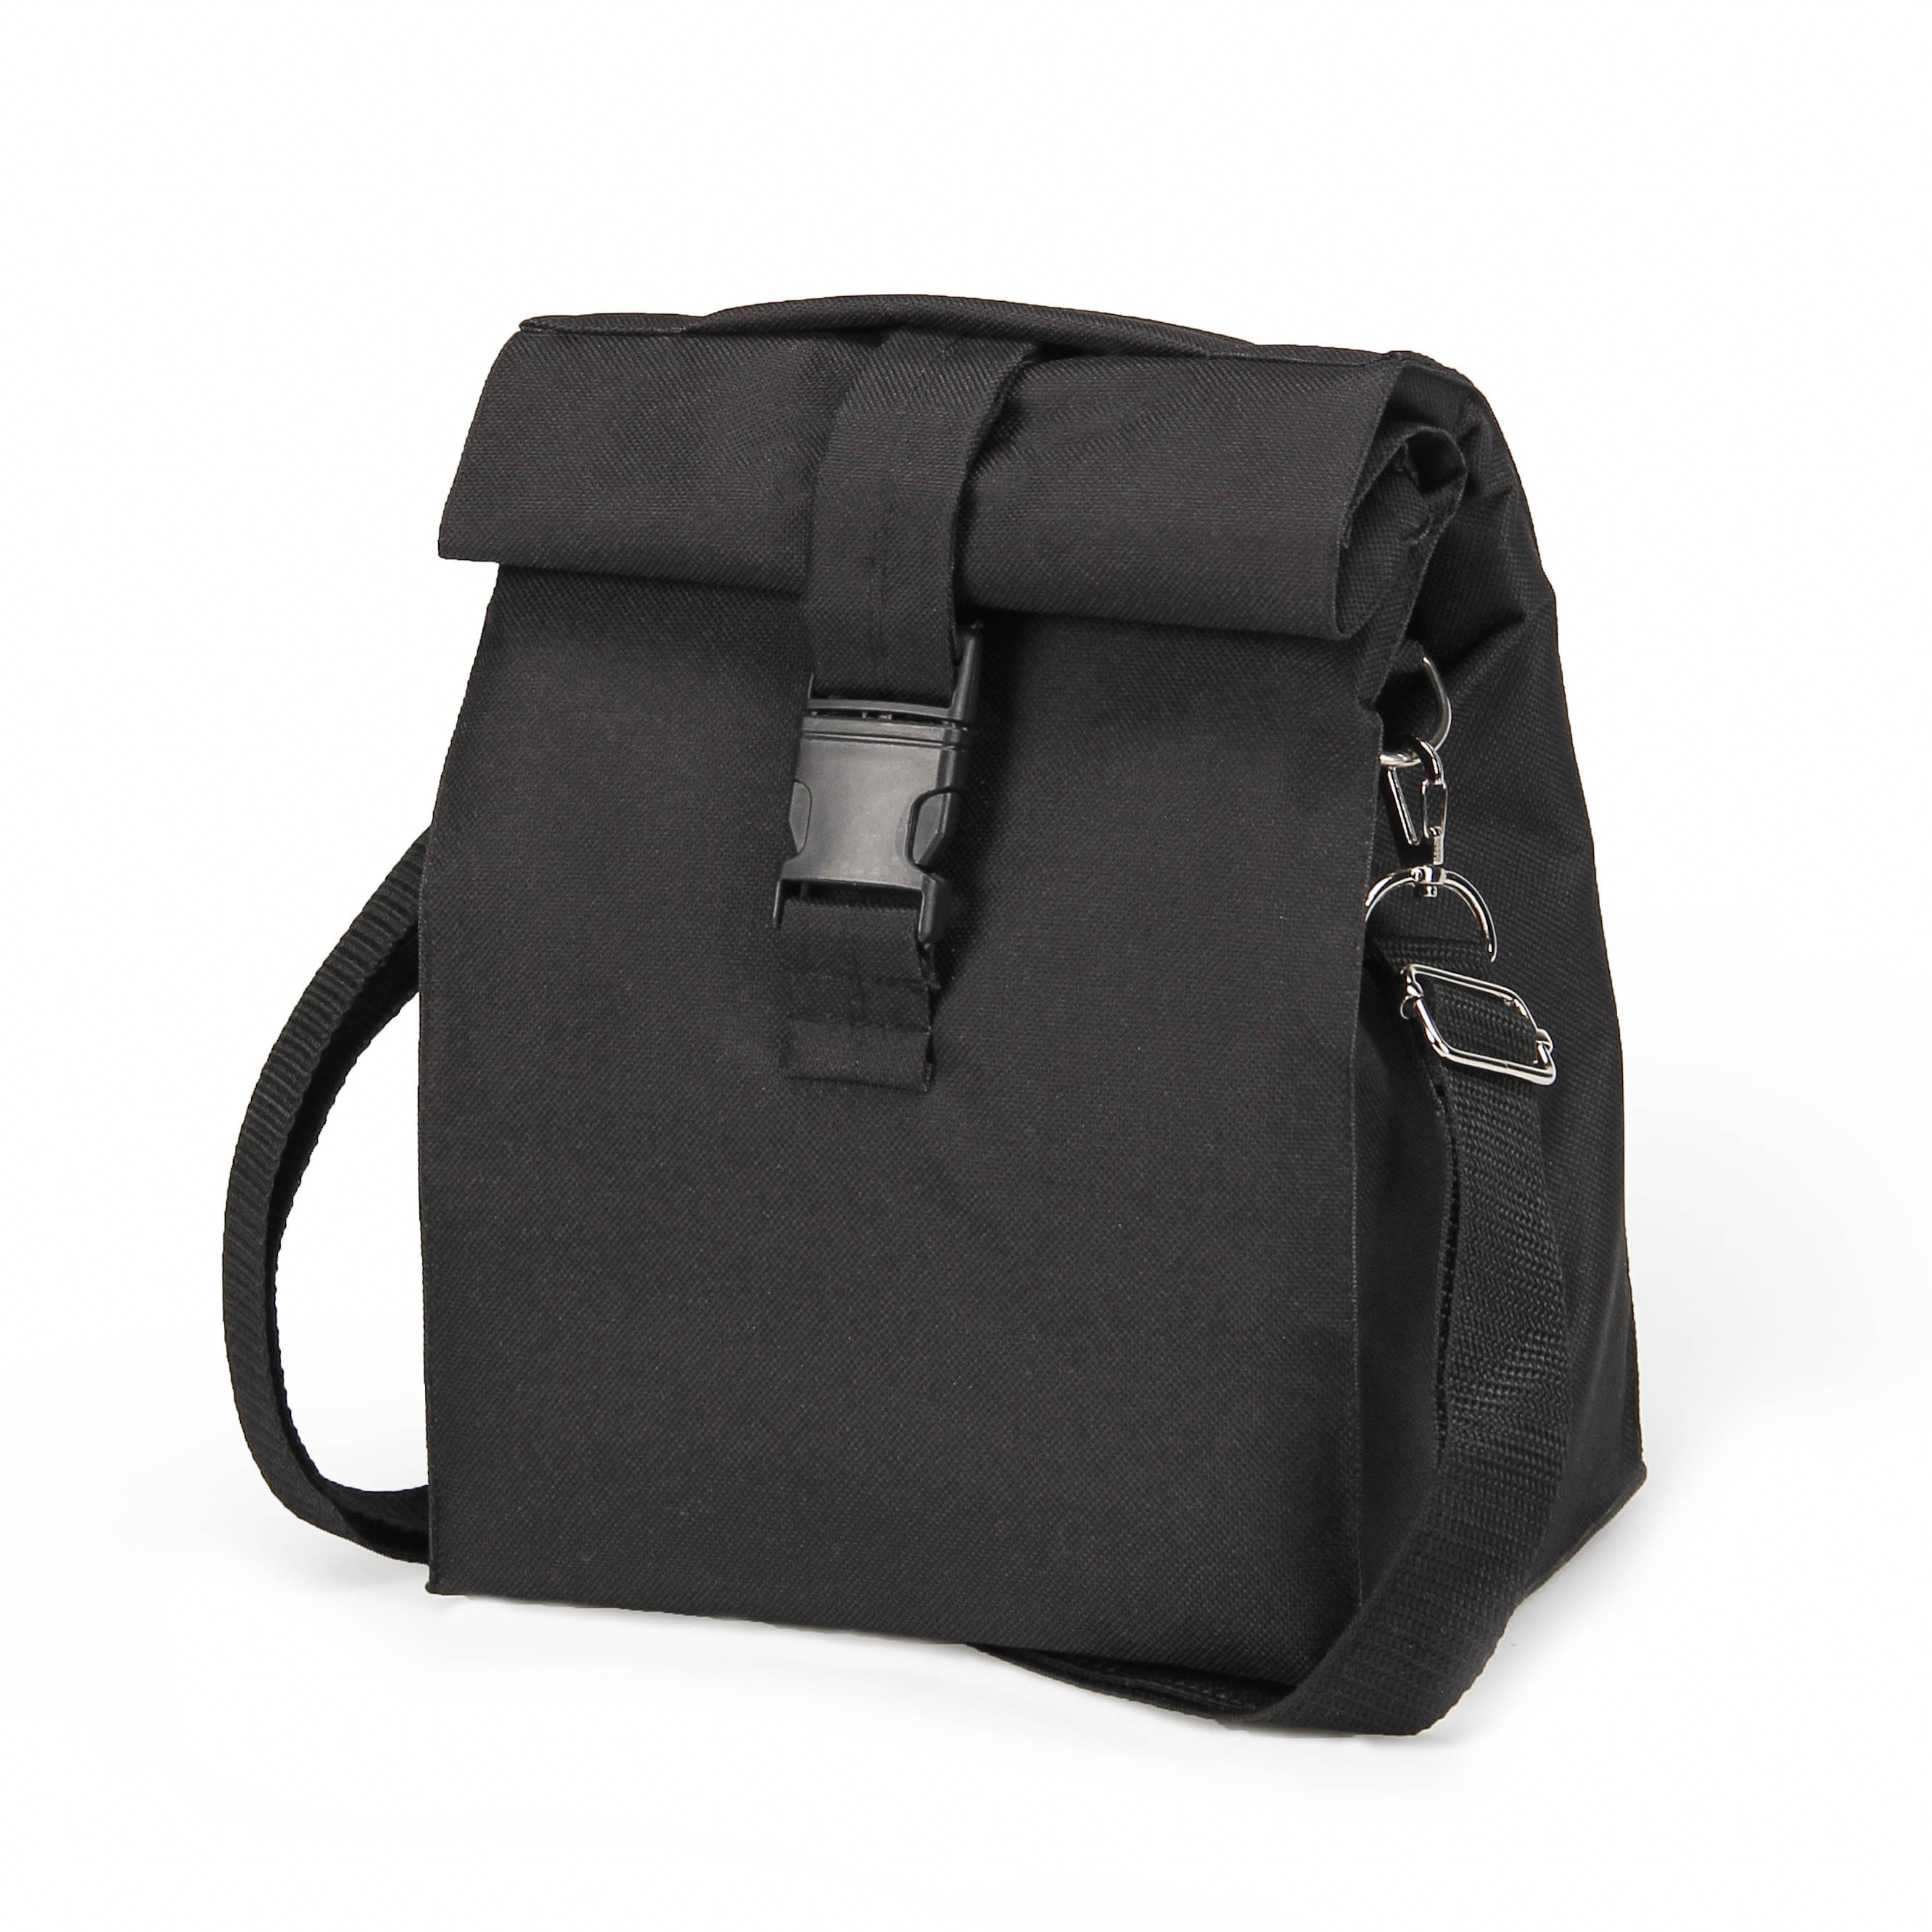 Lunch Bag for Men Lunch Bag Insulated Women Lunch Bag Male Lunch